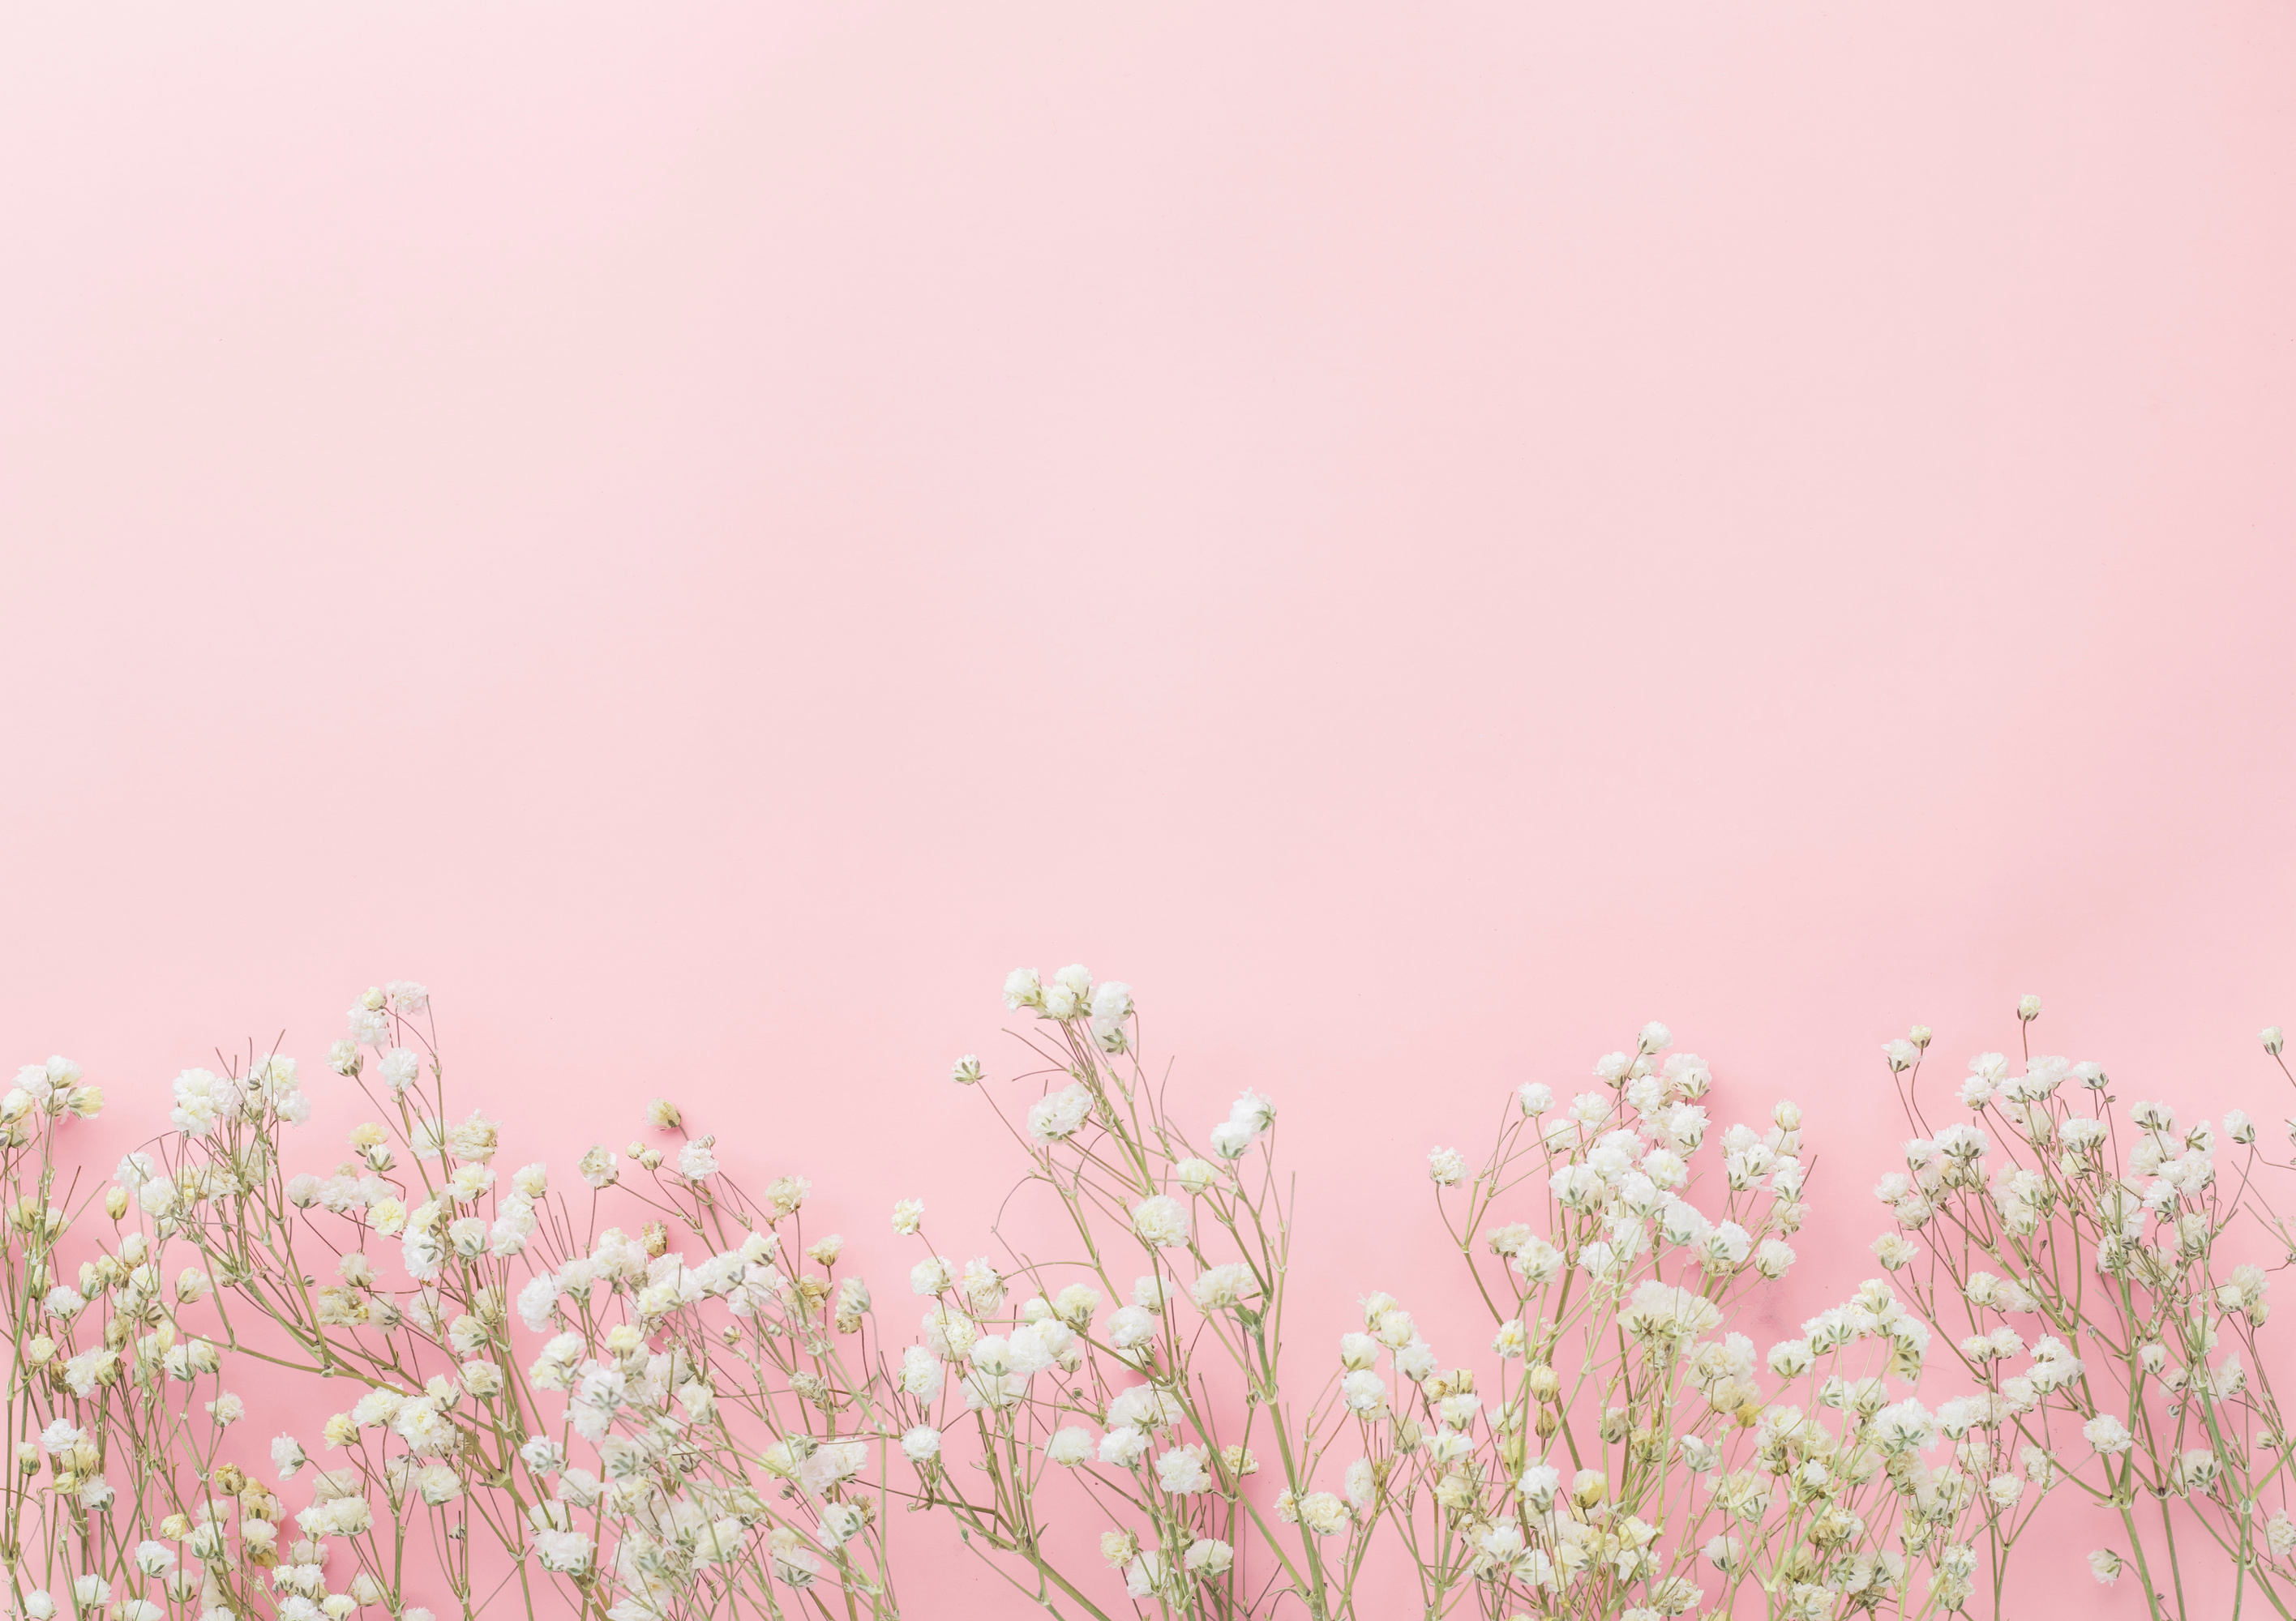 Gypsophila Flowers on Pink Pastel Background, Minimalism, Spring Flower Blosssom Concept, Flat Lay, Top View, Copy Space